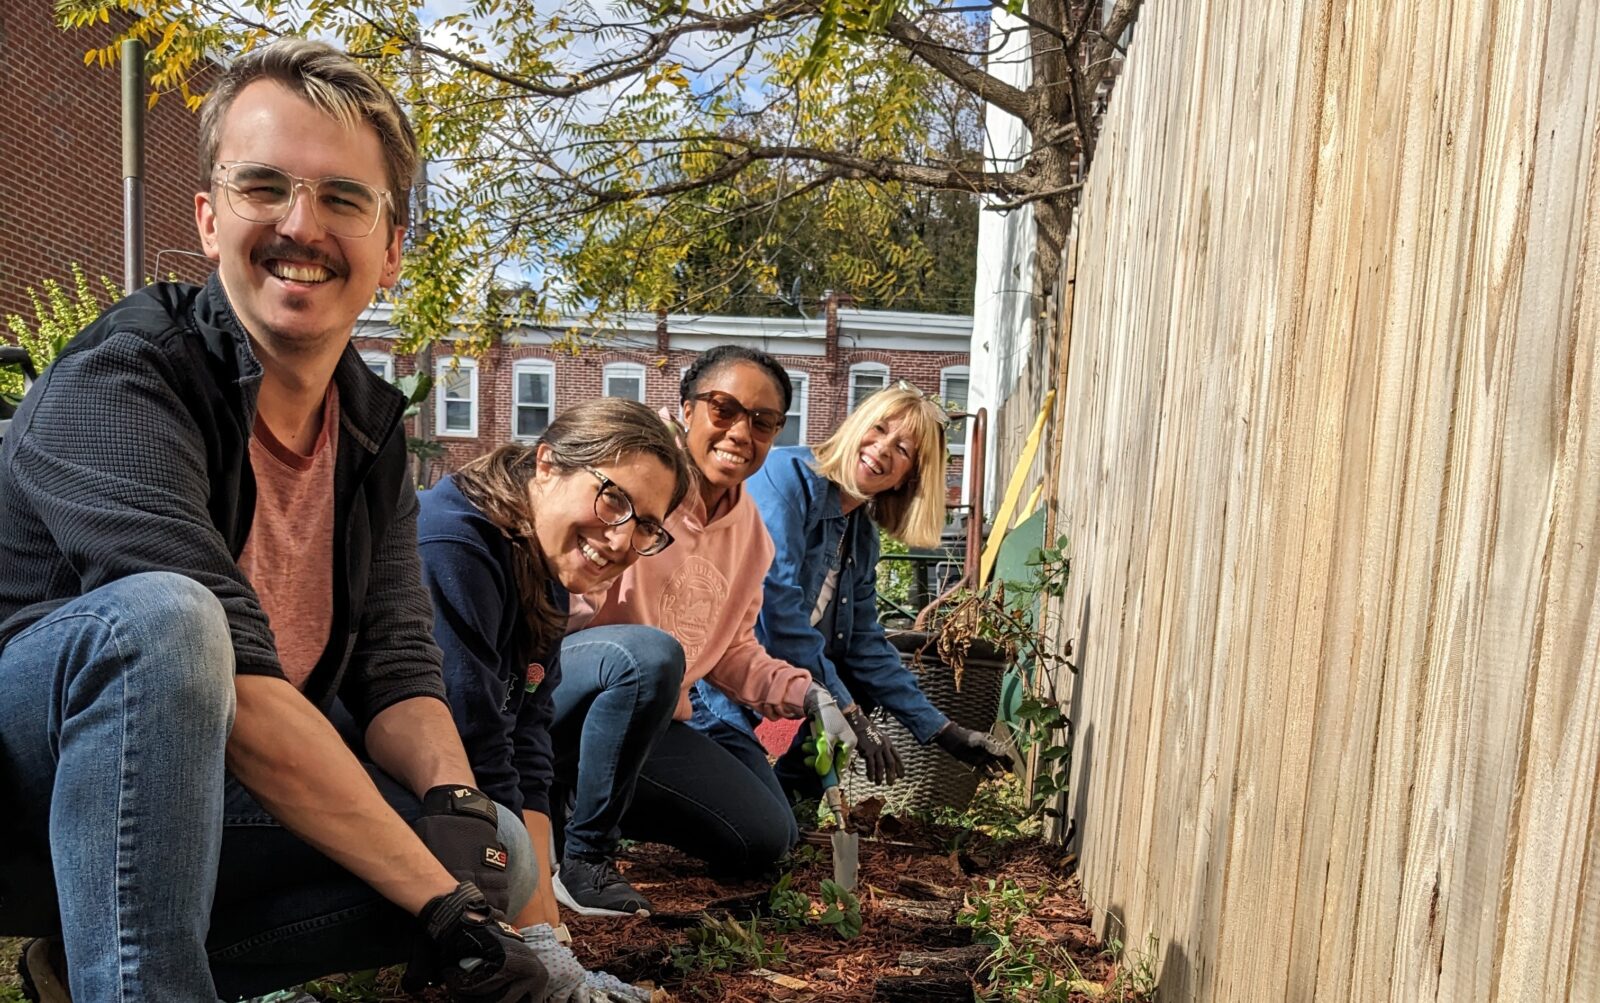 Four people squat down to the ground and plant seedlings in a garden bed. They are facing the camera and smiling.